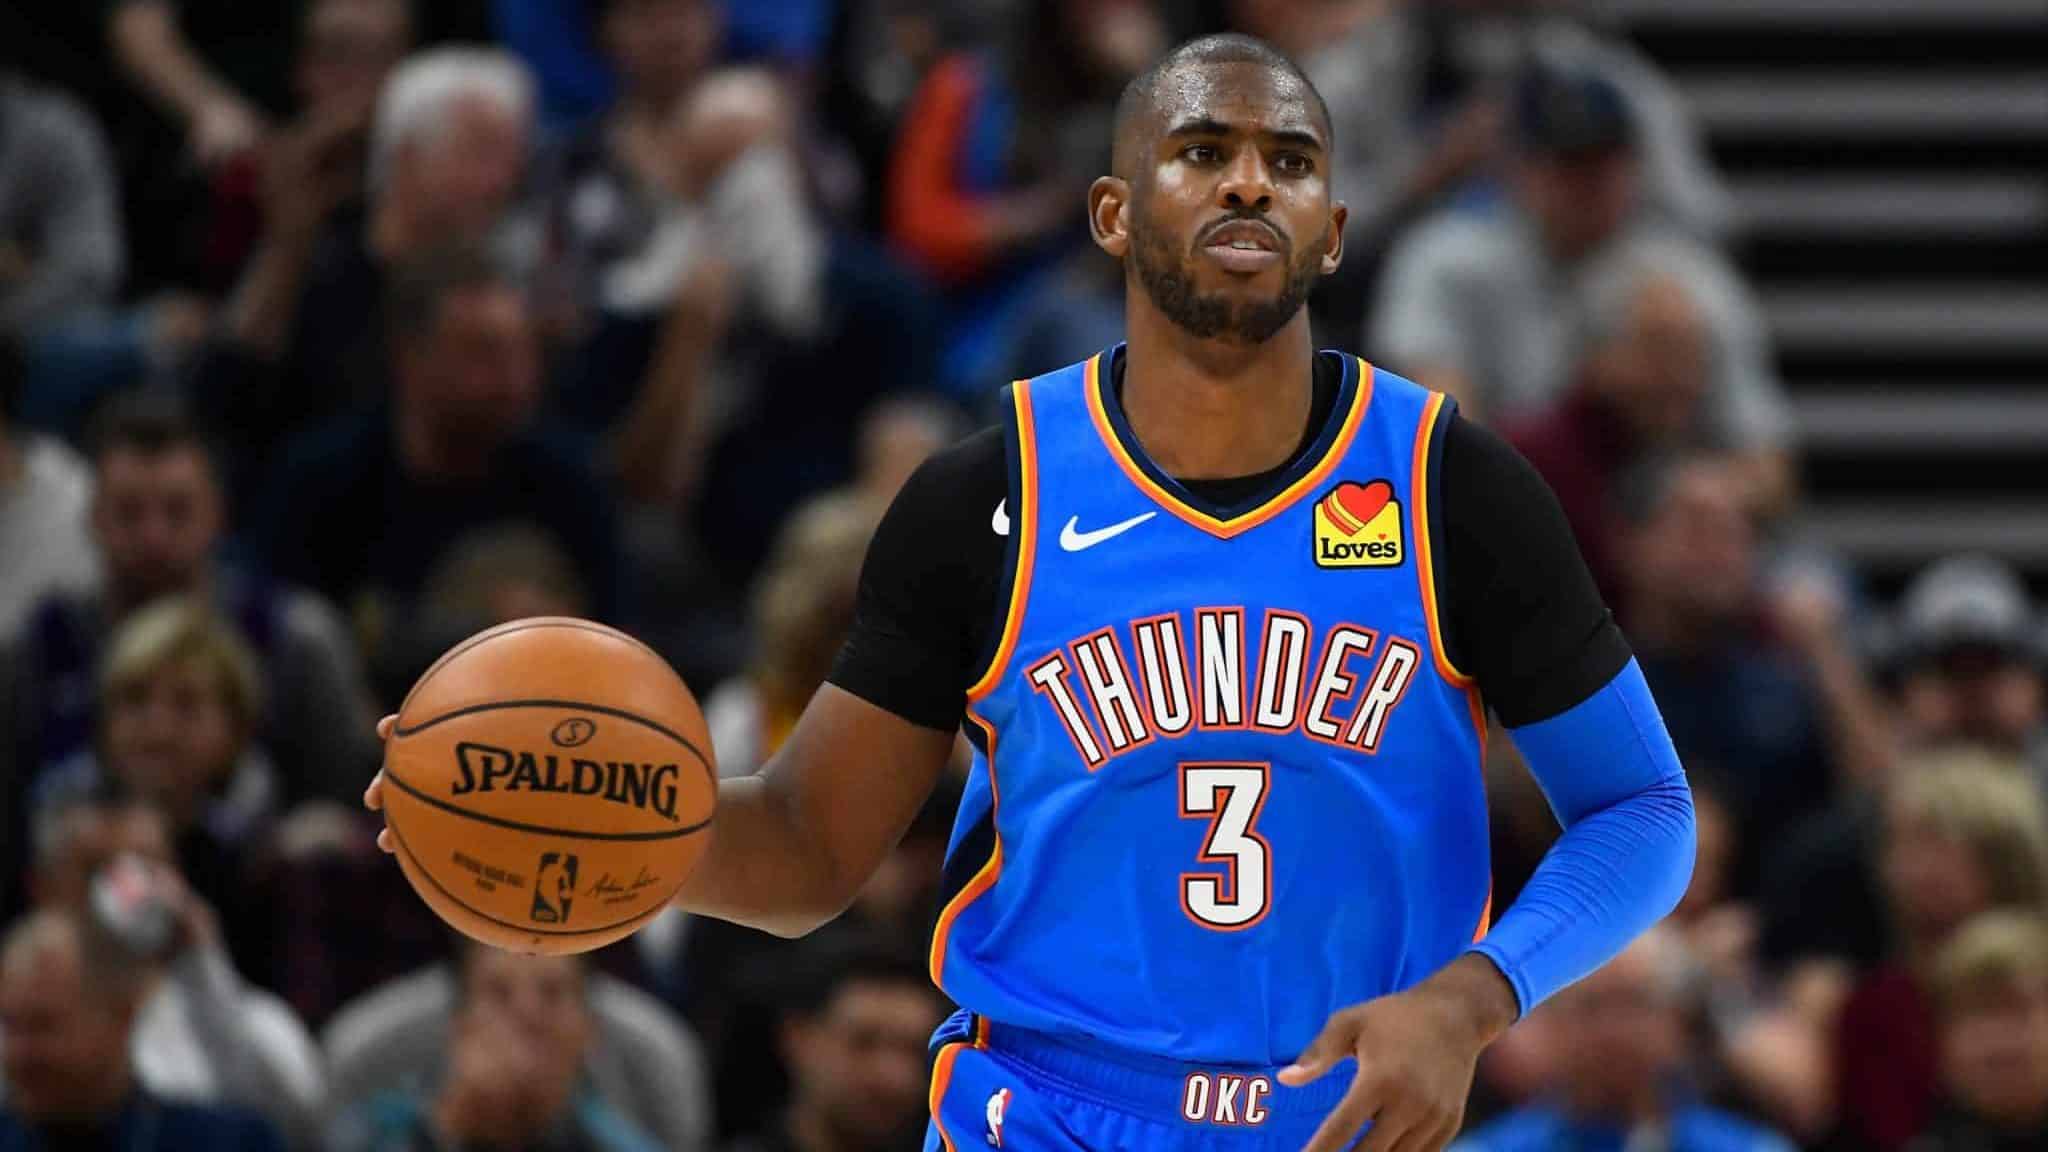 SALT LAKE CITY, UT - OCTOBER 23: Chris Paul #3 of the Oklahoma City Thunder looks on during an opening night game against the Oklahoma City Thunder at Vivint Smart Home Arena on October 23, 2019 in Salt Lake City, Utah. NOTE TO USER: User expressly acknowledges and agrees that, by downloading and or using this photograph, User is consenting to the terms and conditions of the Getty Images License Agreement.